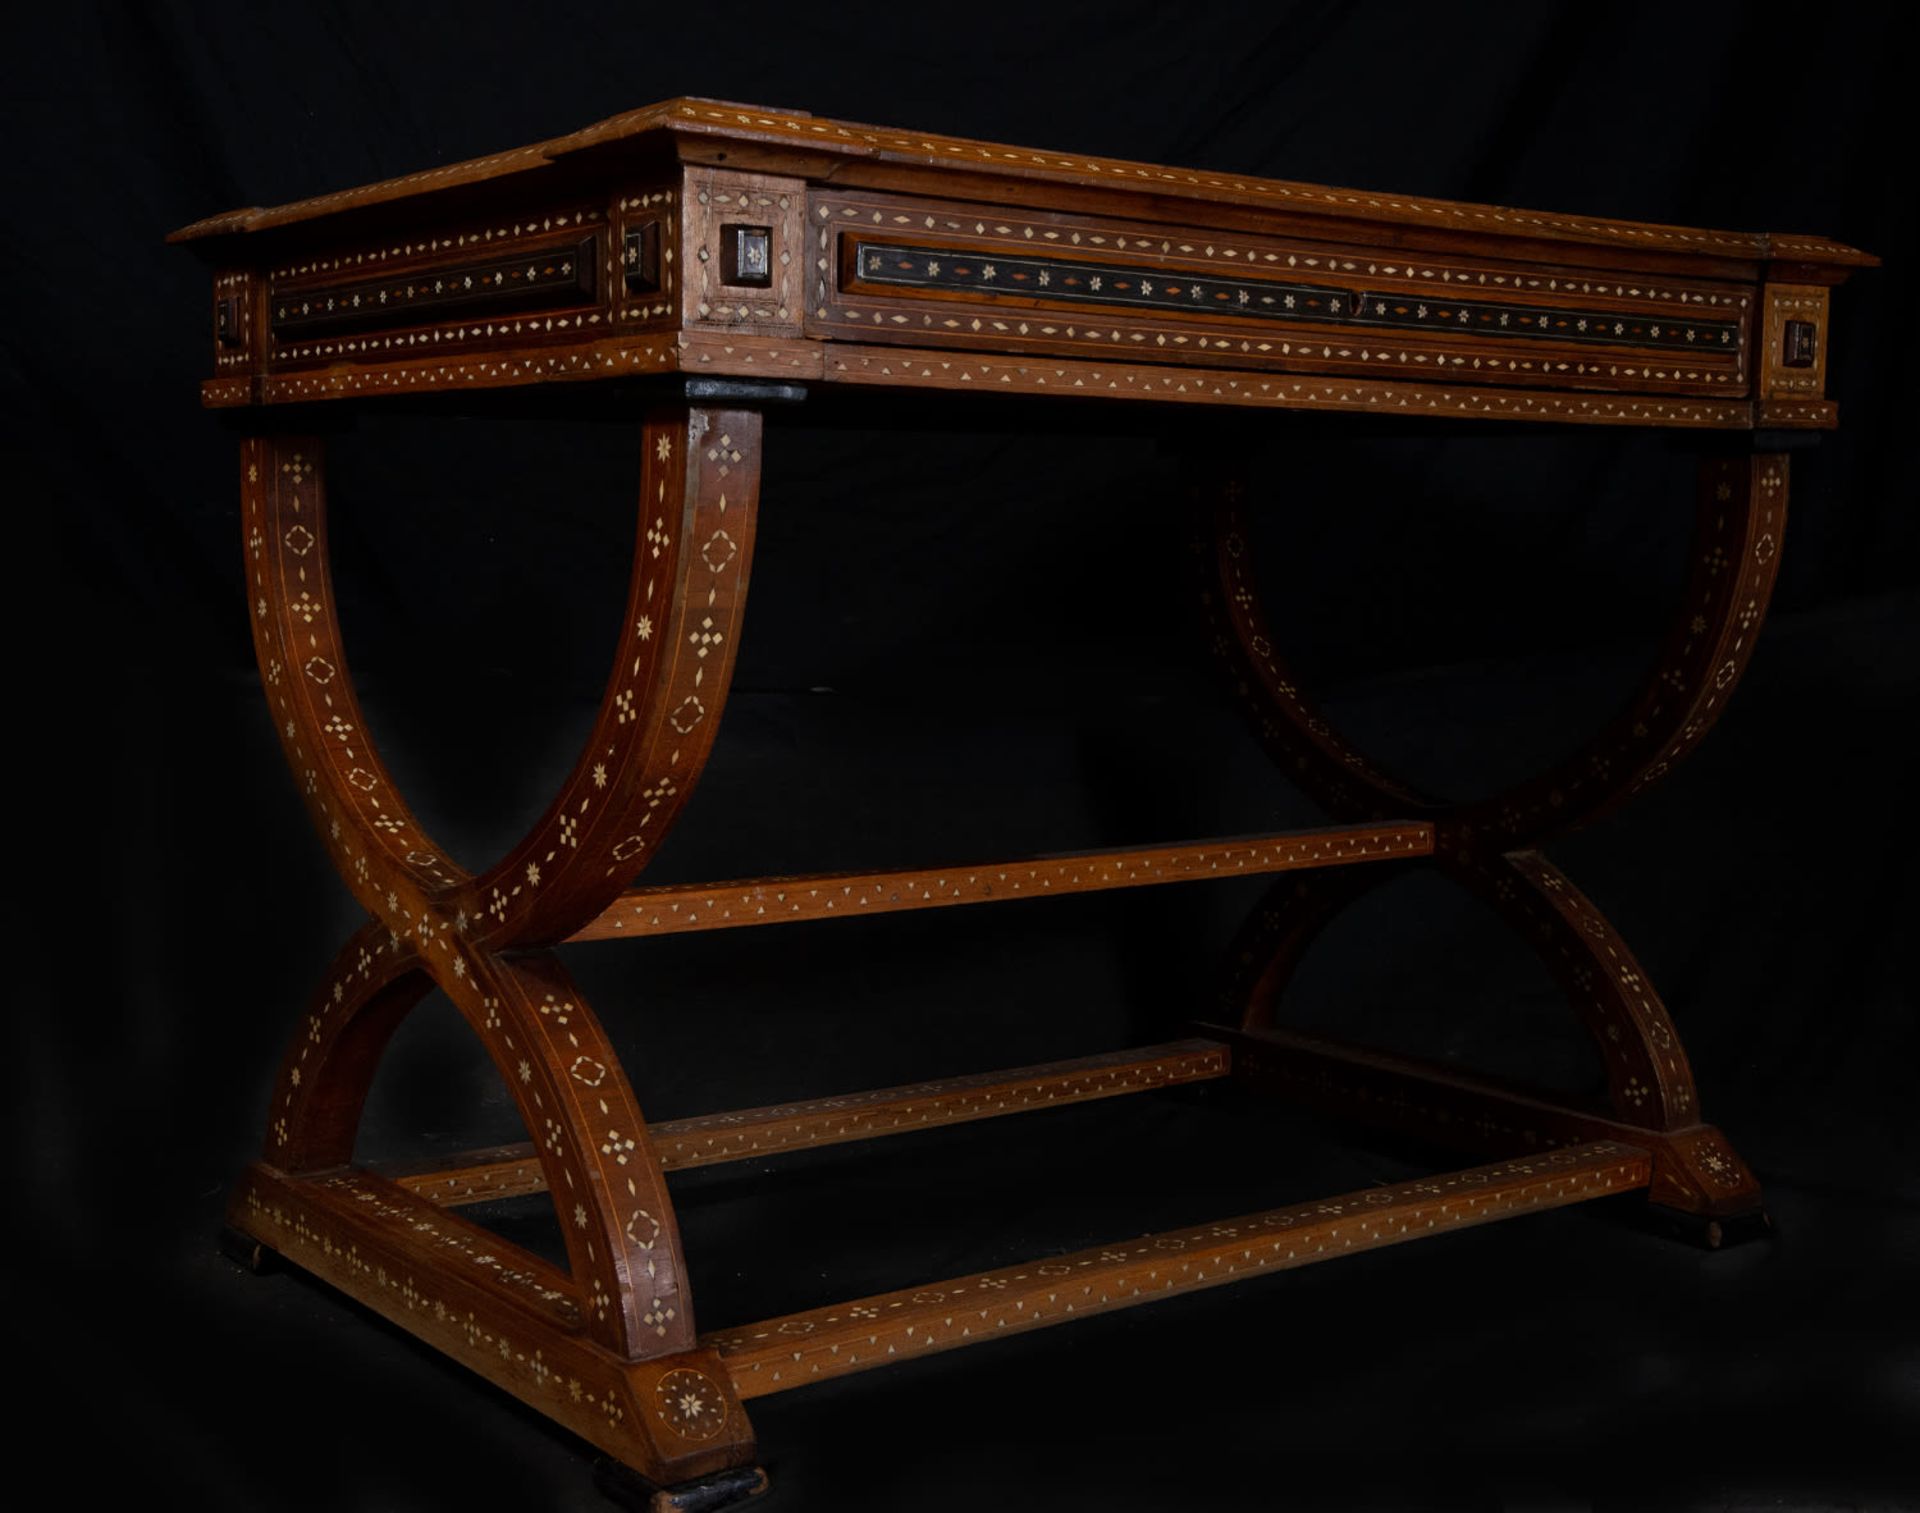 Exceptional Piedmontese Table in Bone inlay, Italian work of the 18th century - Image 6 of 7